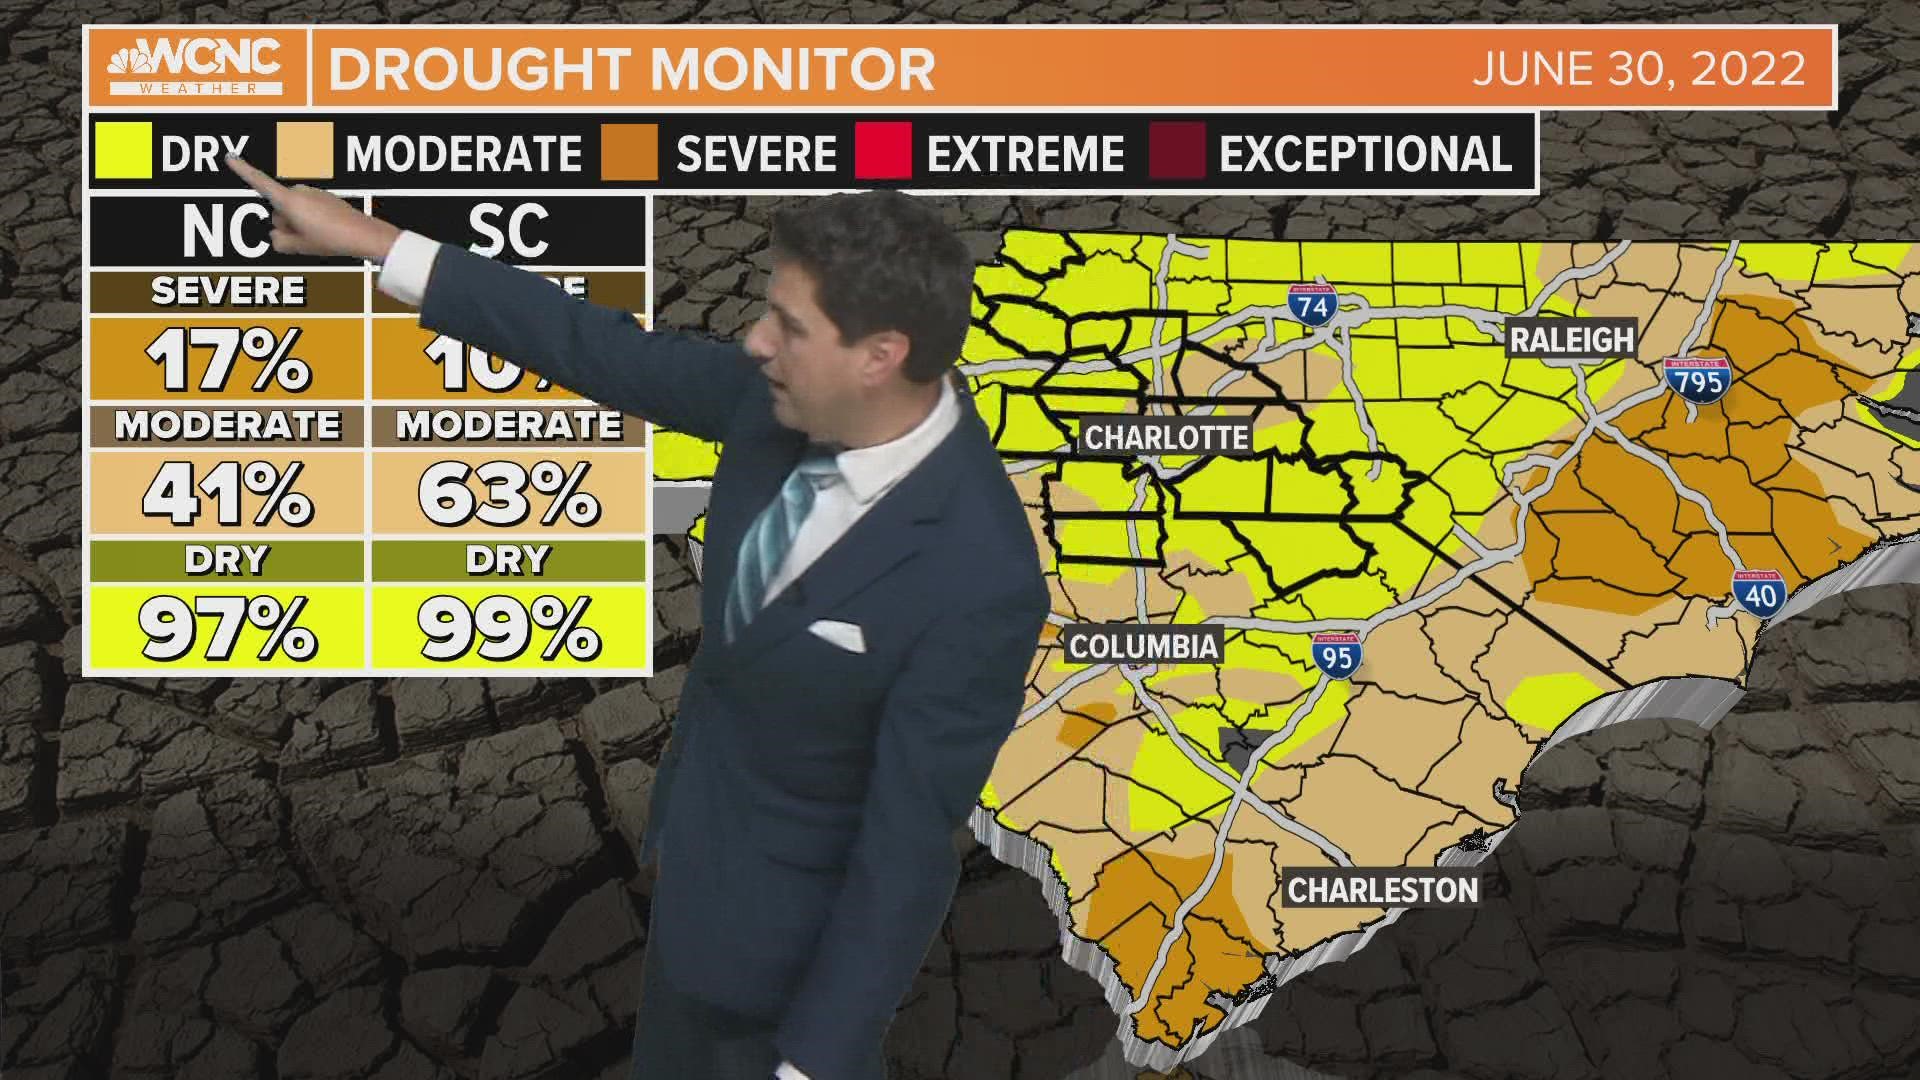 More than half of South Carolina is under a moderate drought and almost all of the Carolinas at least under an abnormally dry status